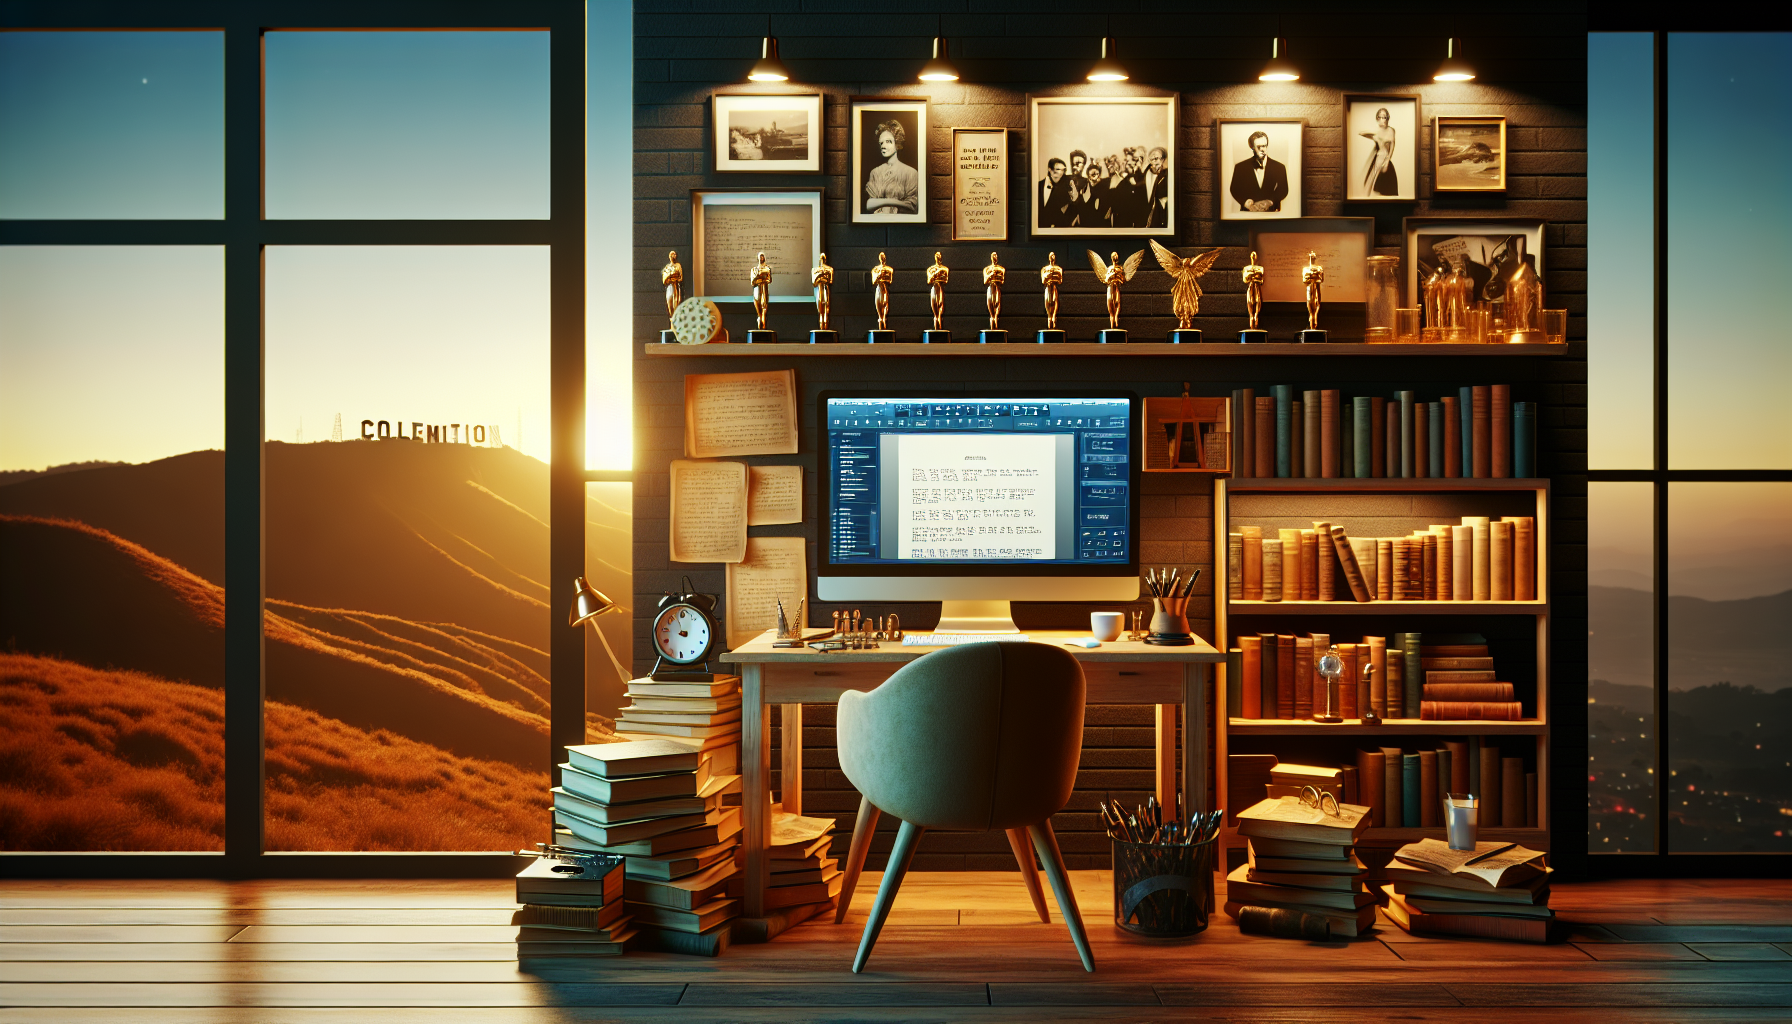 A cozy writer's nook with a vintage typewriter, stacks of screenplay manuscripts, a glowing laptop open to a screenwriting software, framed posters of iconic films on the walls, and a shelf filled wit